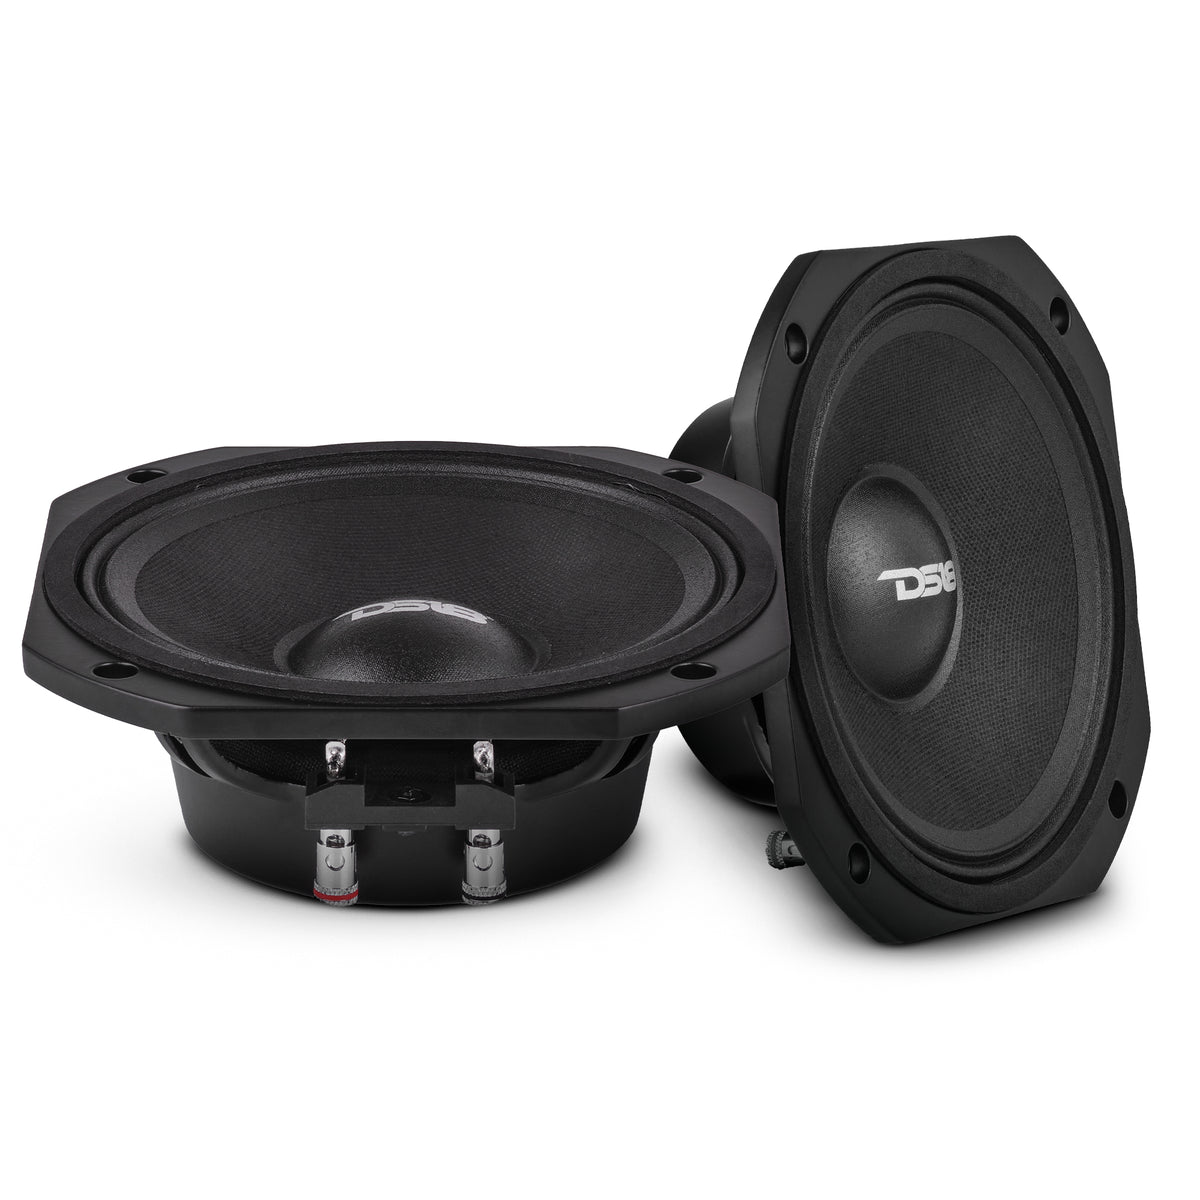 PRO 6.5” Slim Professional Mid-Range Speaker With Neodymium Magnet For Dome 180 Watts Rms 8-Ohm